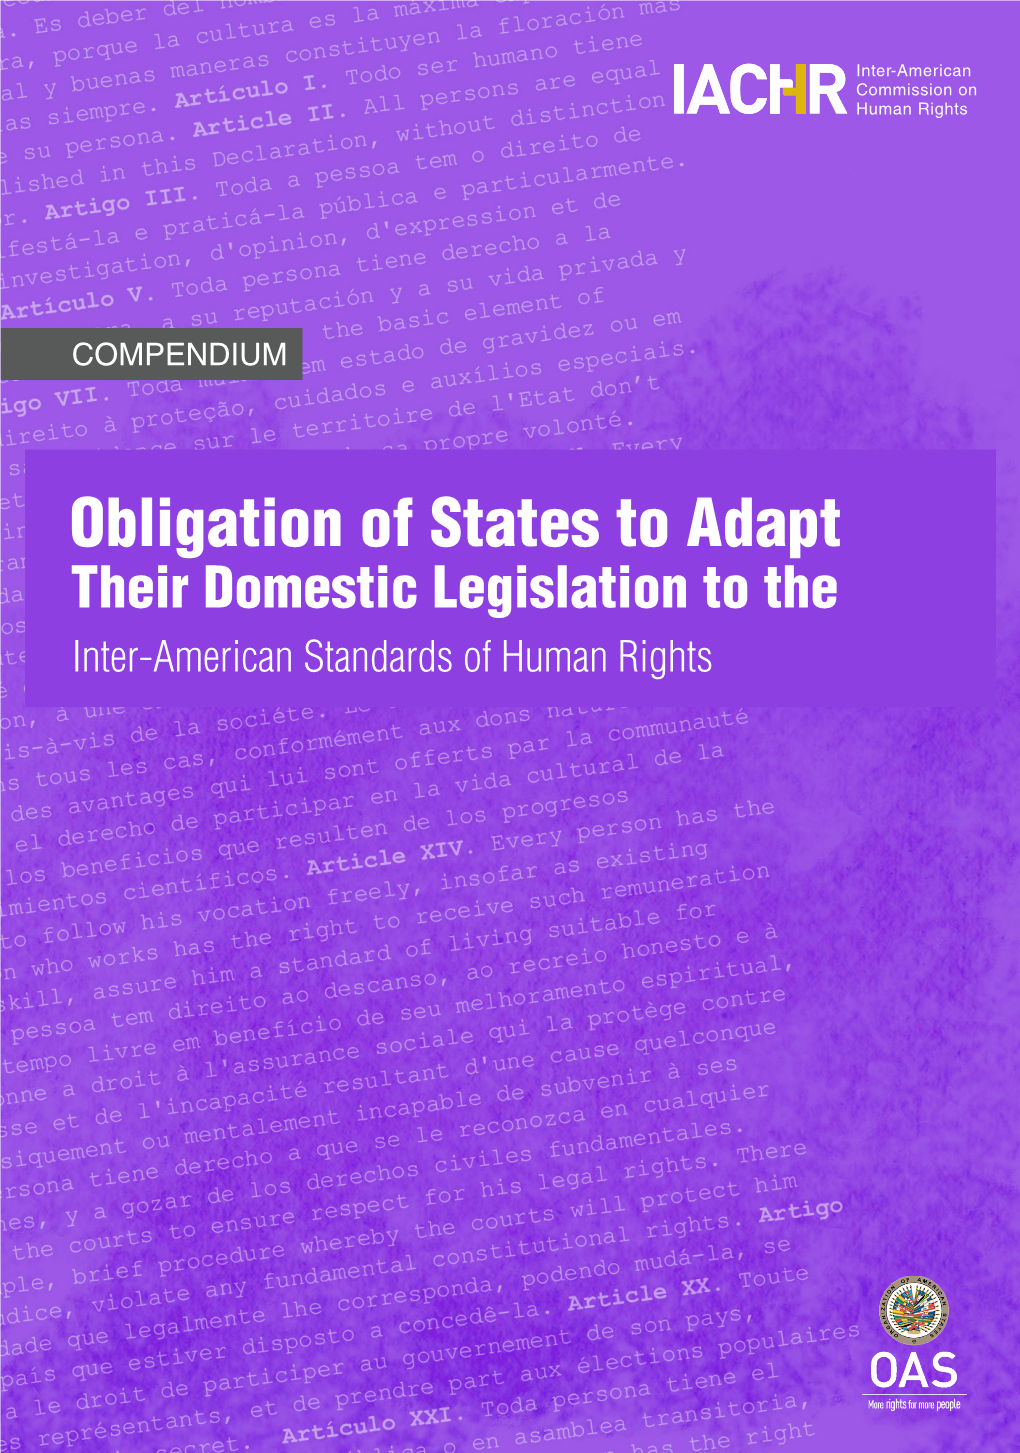 Obligation of States to Adapt Their Domestic Legislation to the Inter-American Standards of Human Rights